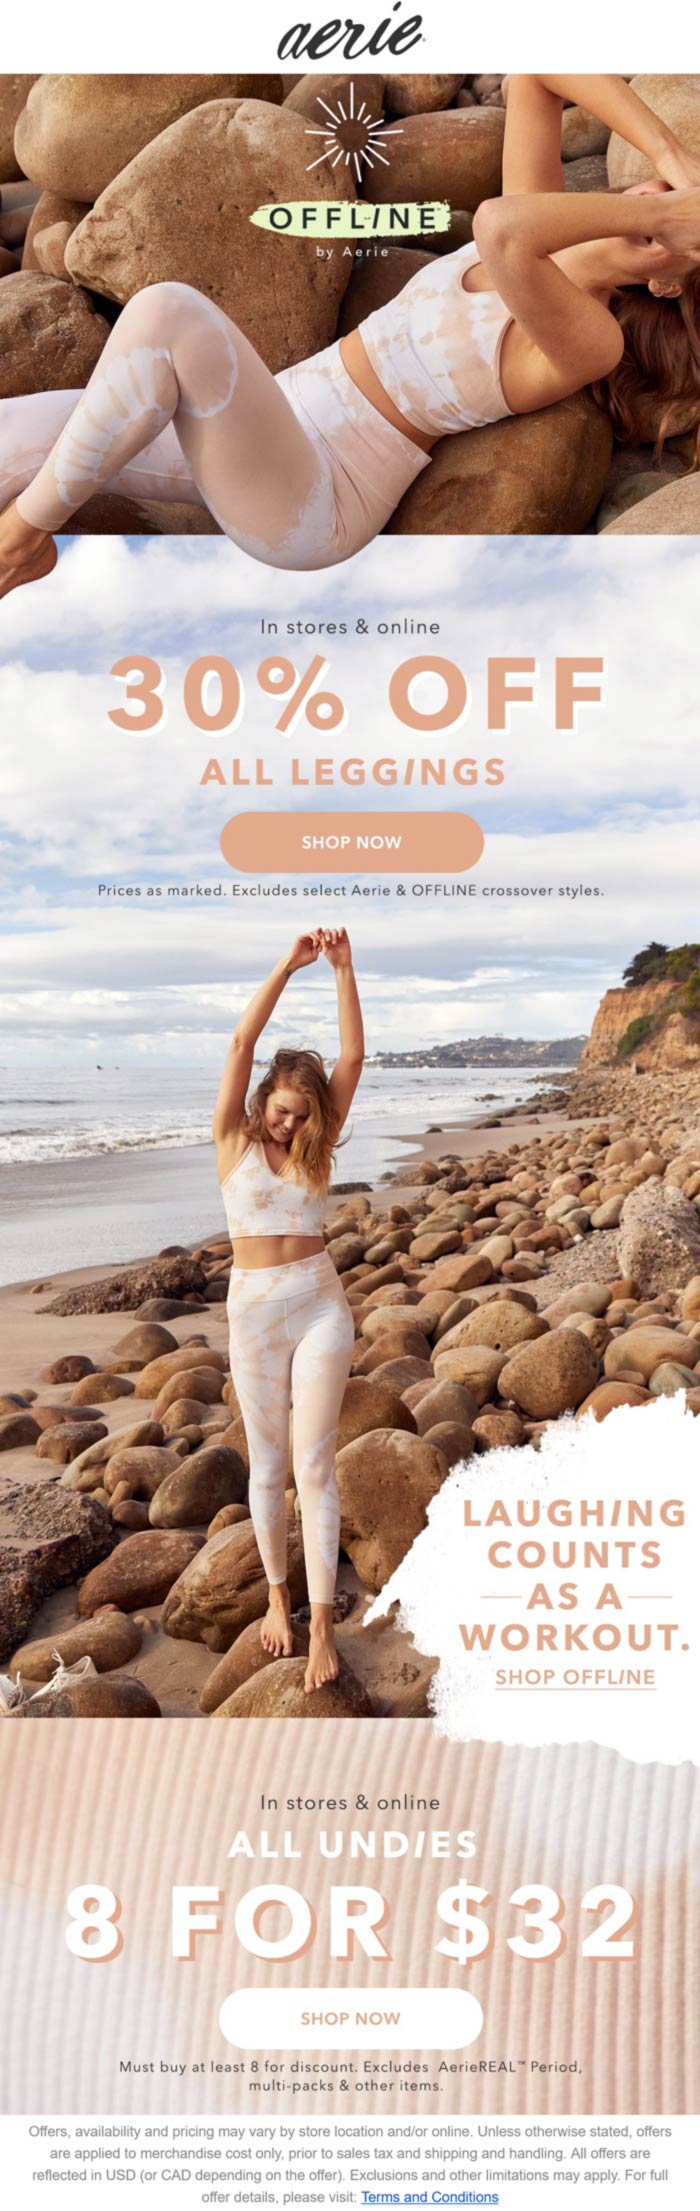 Aerie stores Coupon  30% off all leggings at Aerie, ditto online #aerie 